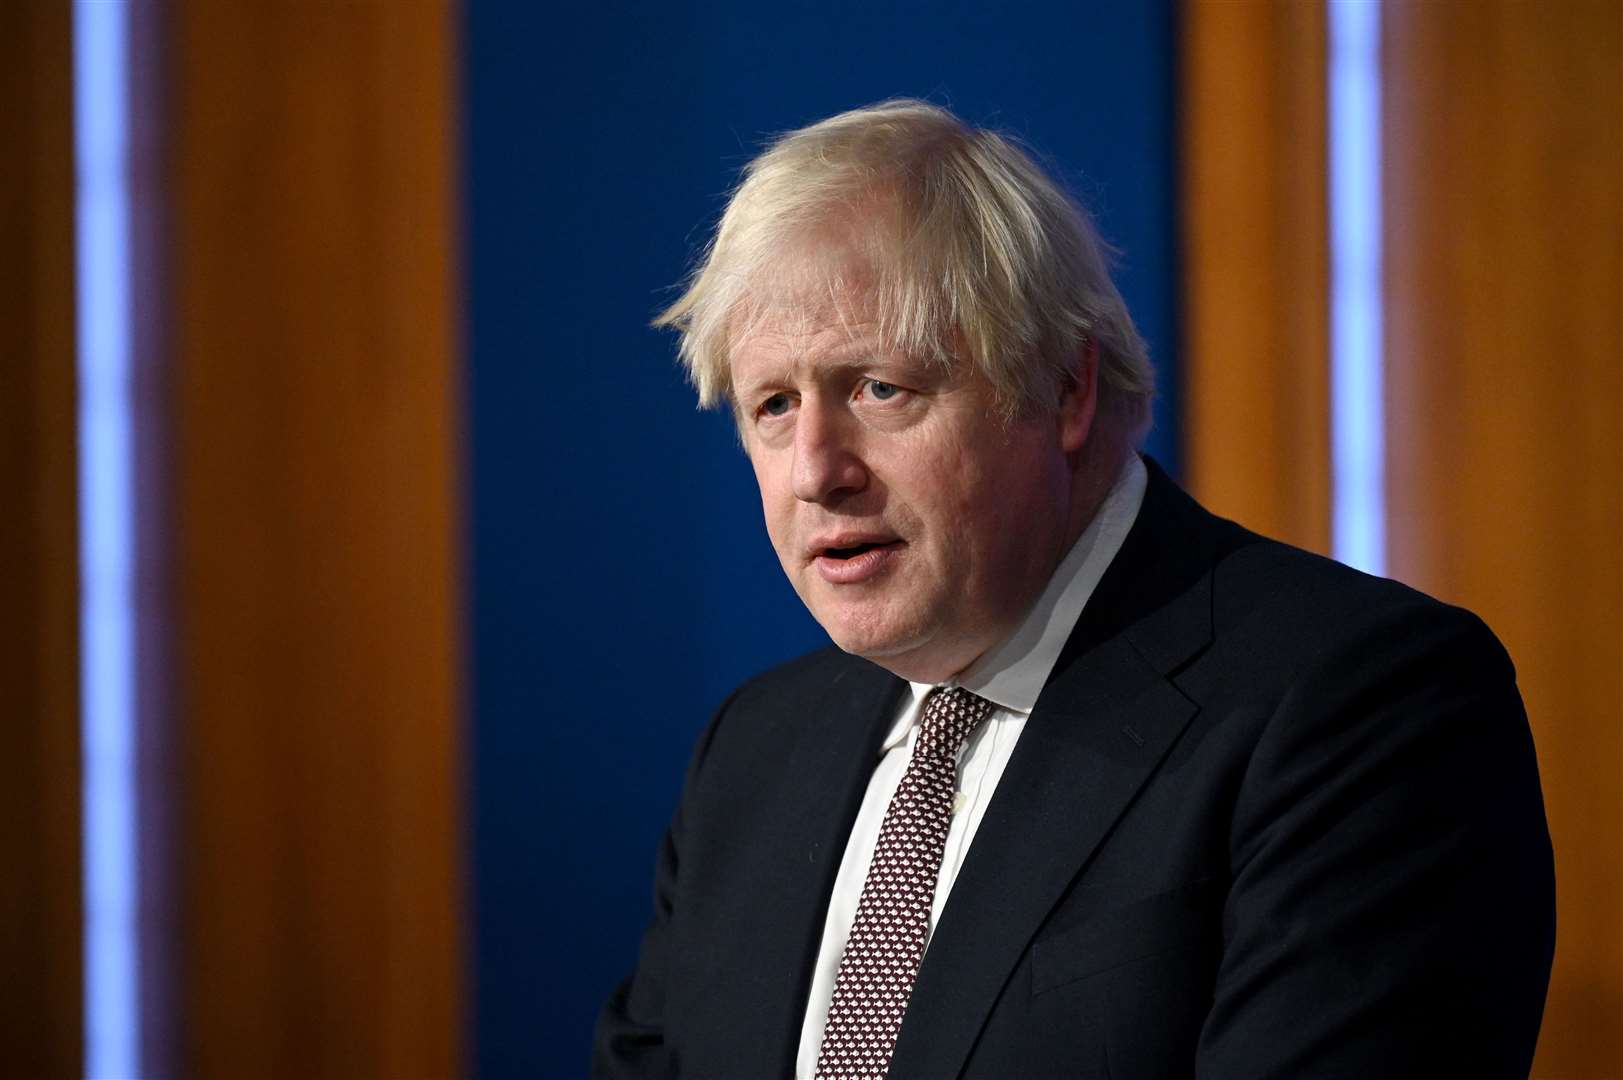 Boris Johnson has said lessons must learned from what happened (Leon Neal/PA)